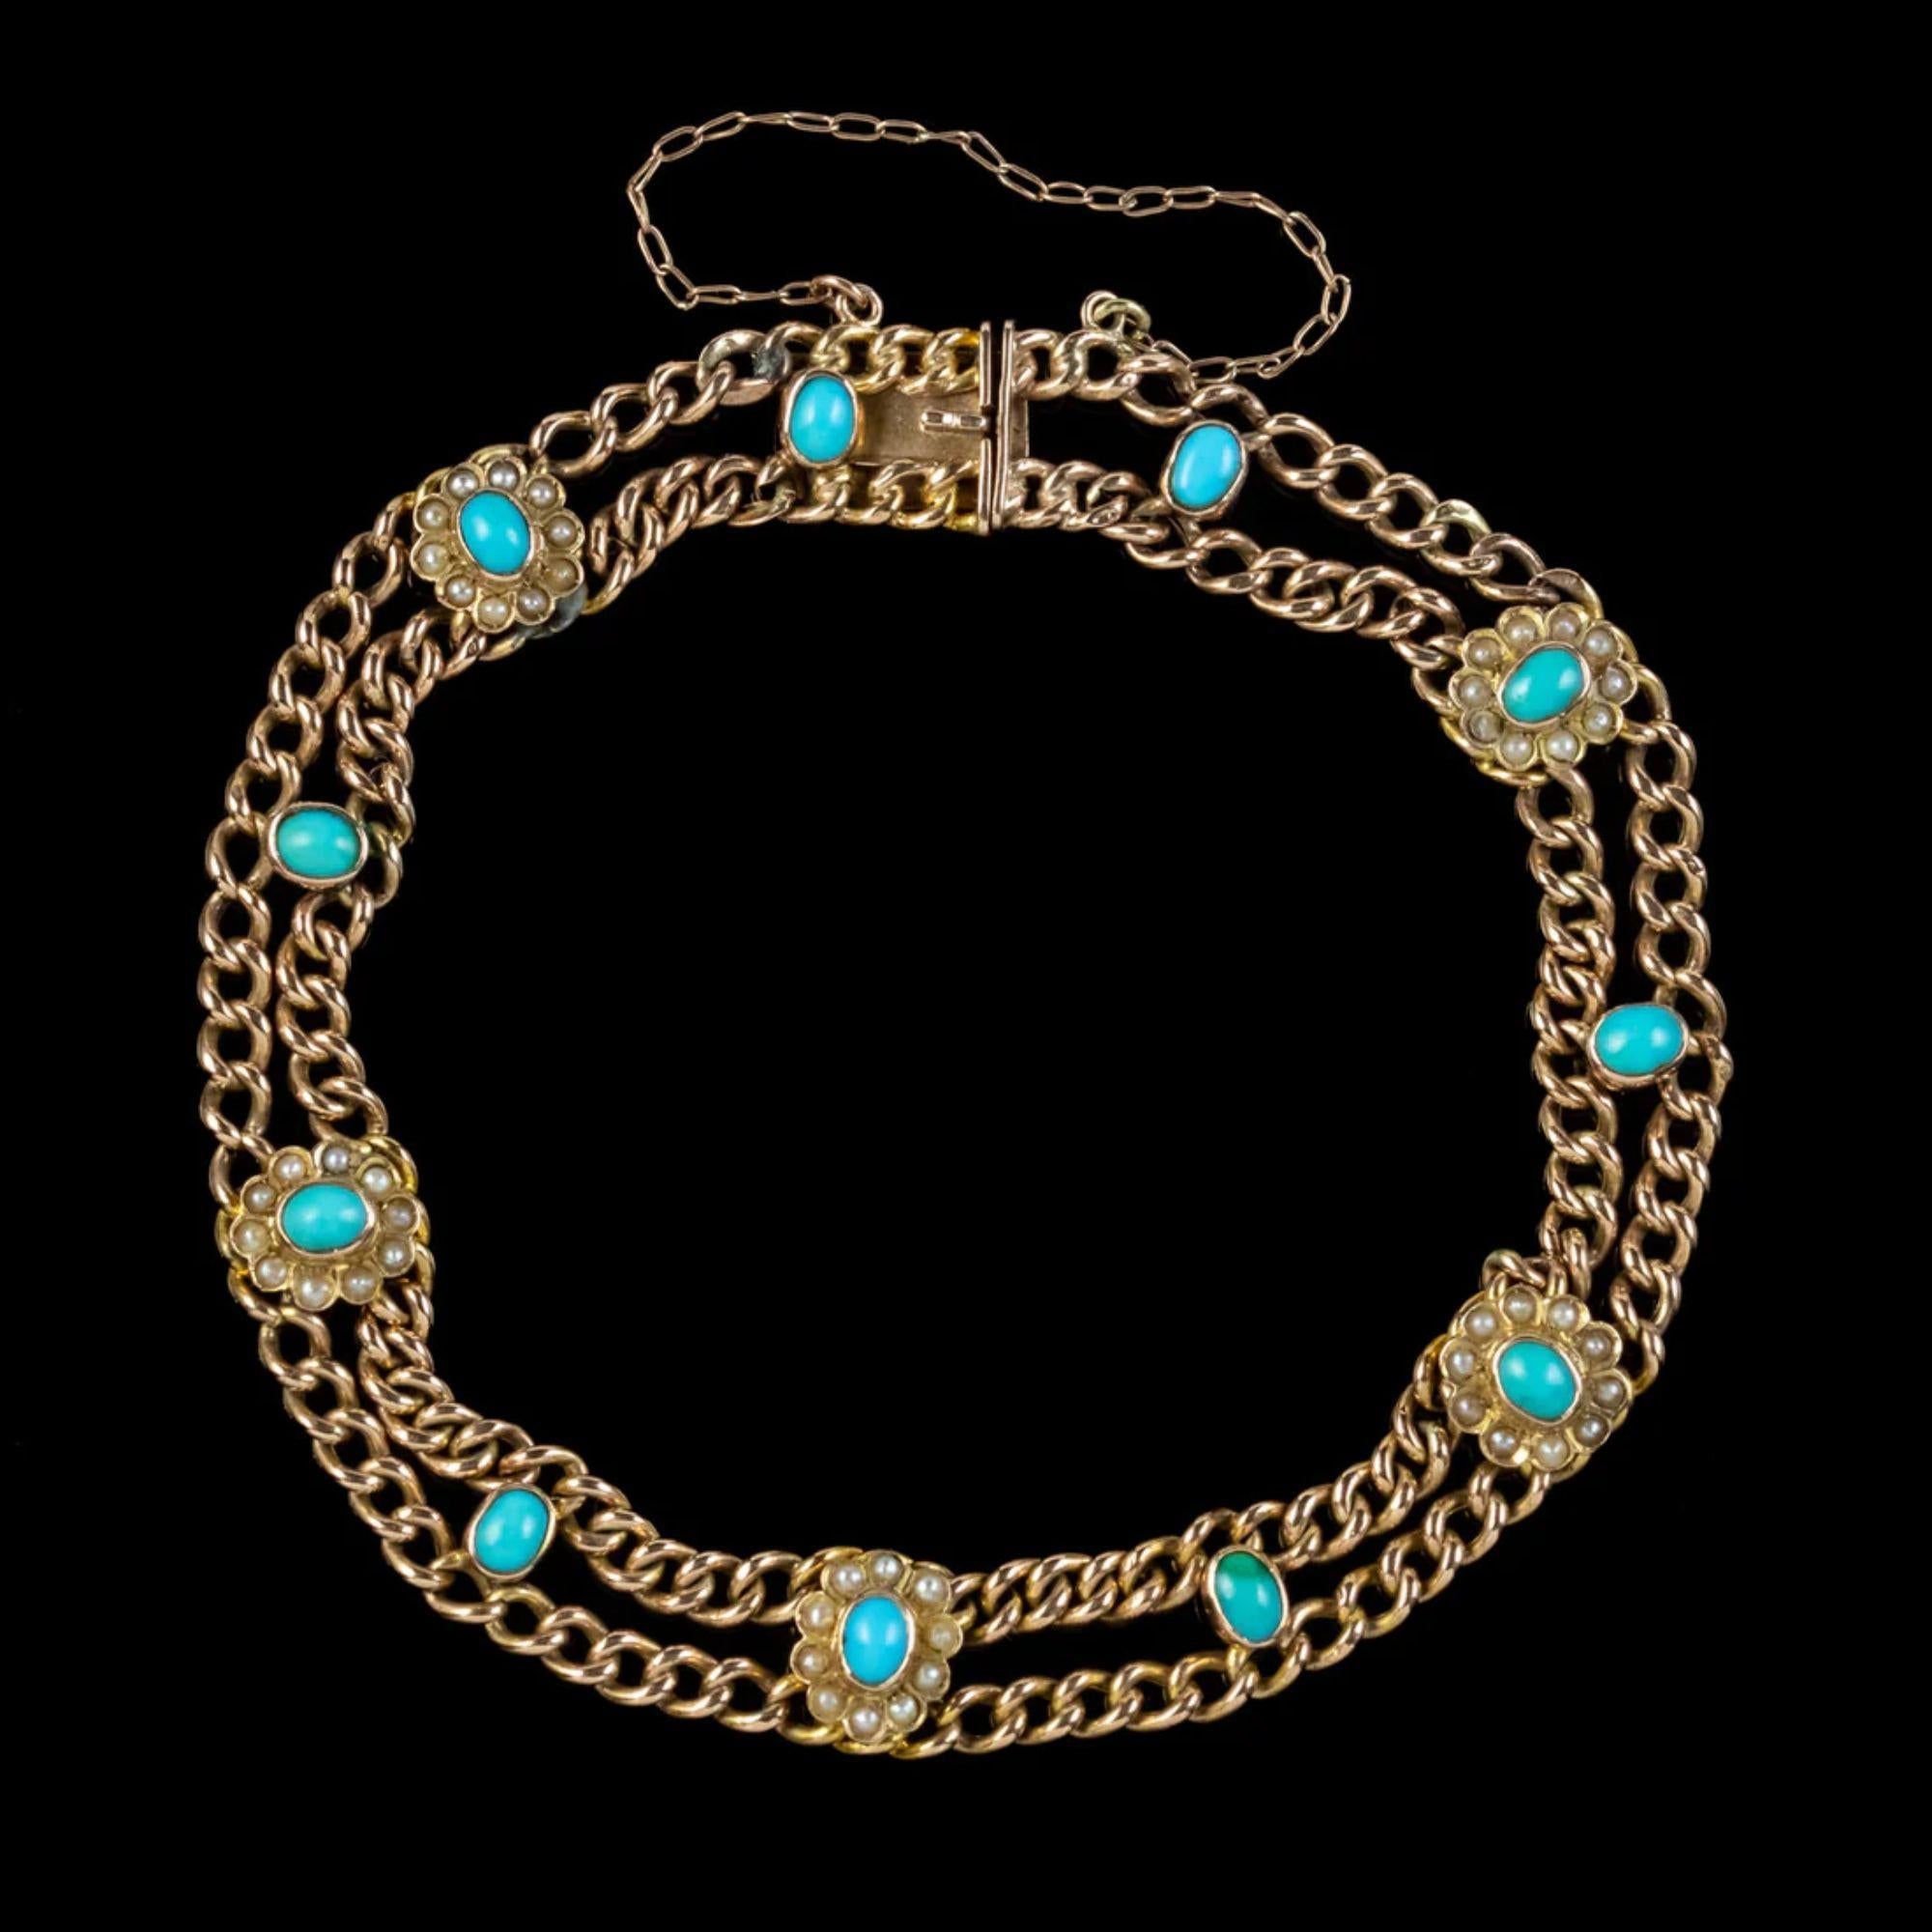 A beautiful antique Victorian bracelet from the late 19th Century featuring twin curb chains, interspersed with turquoise flowers, studded with pearl petals. 

The piece is all 9ct gold and fitted with a box clasp and safety chain to hold it